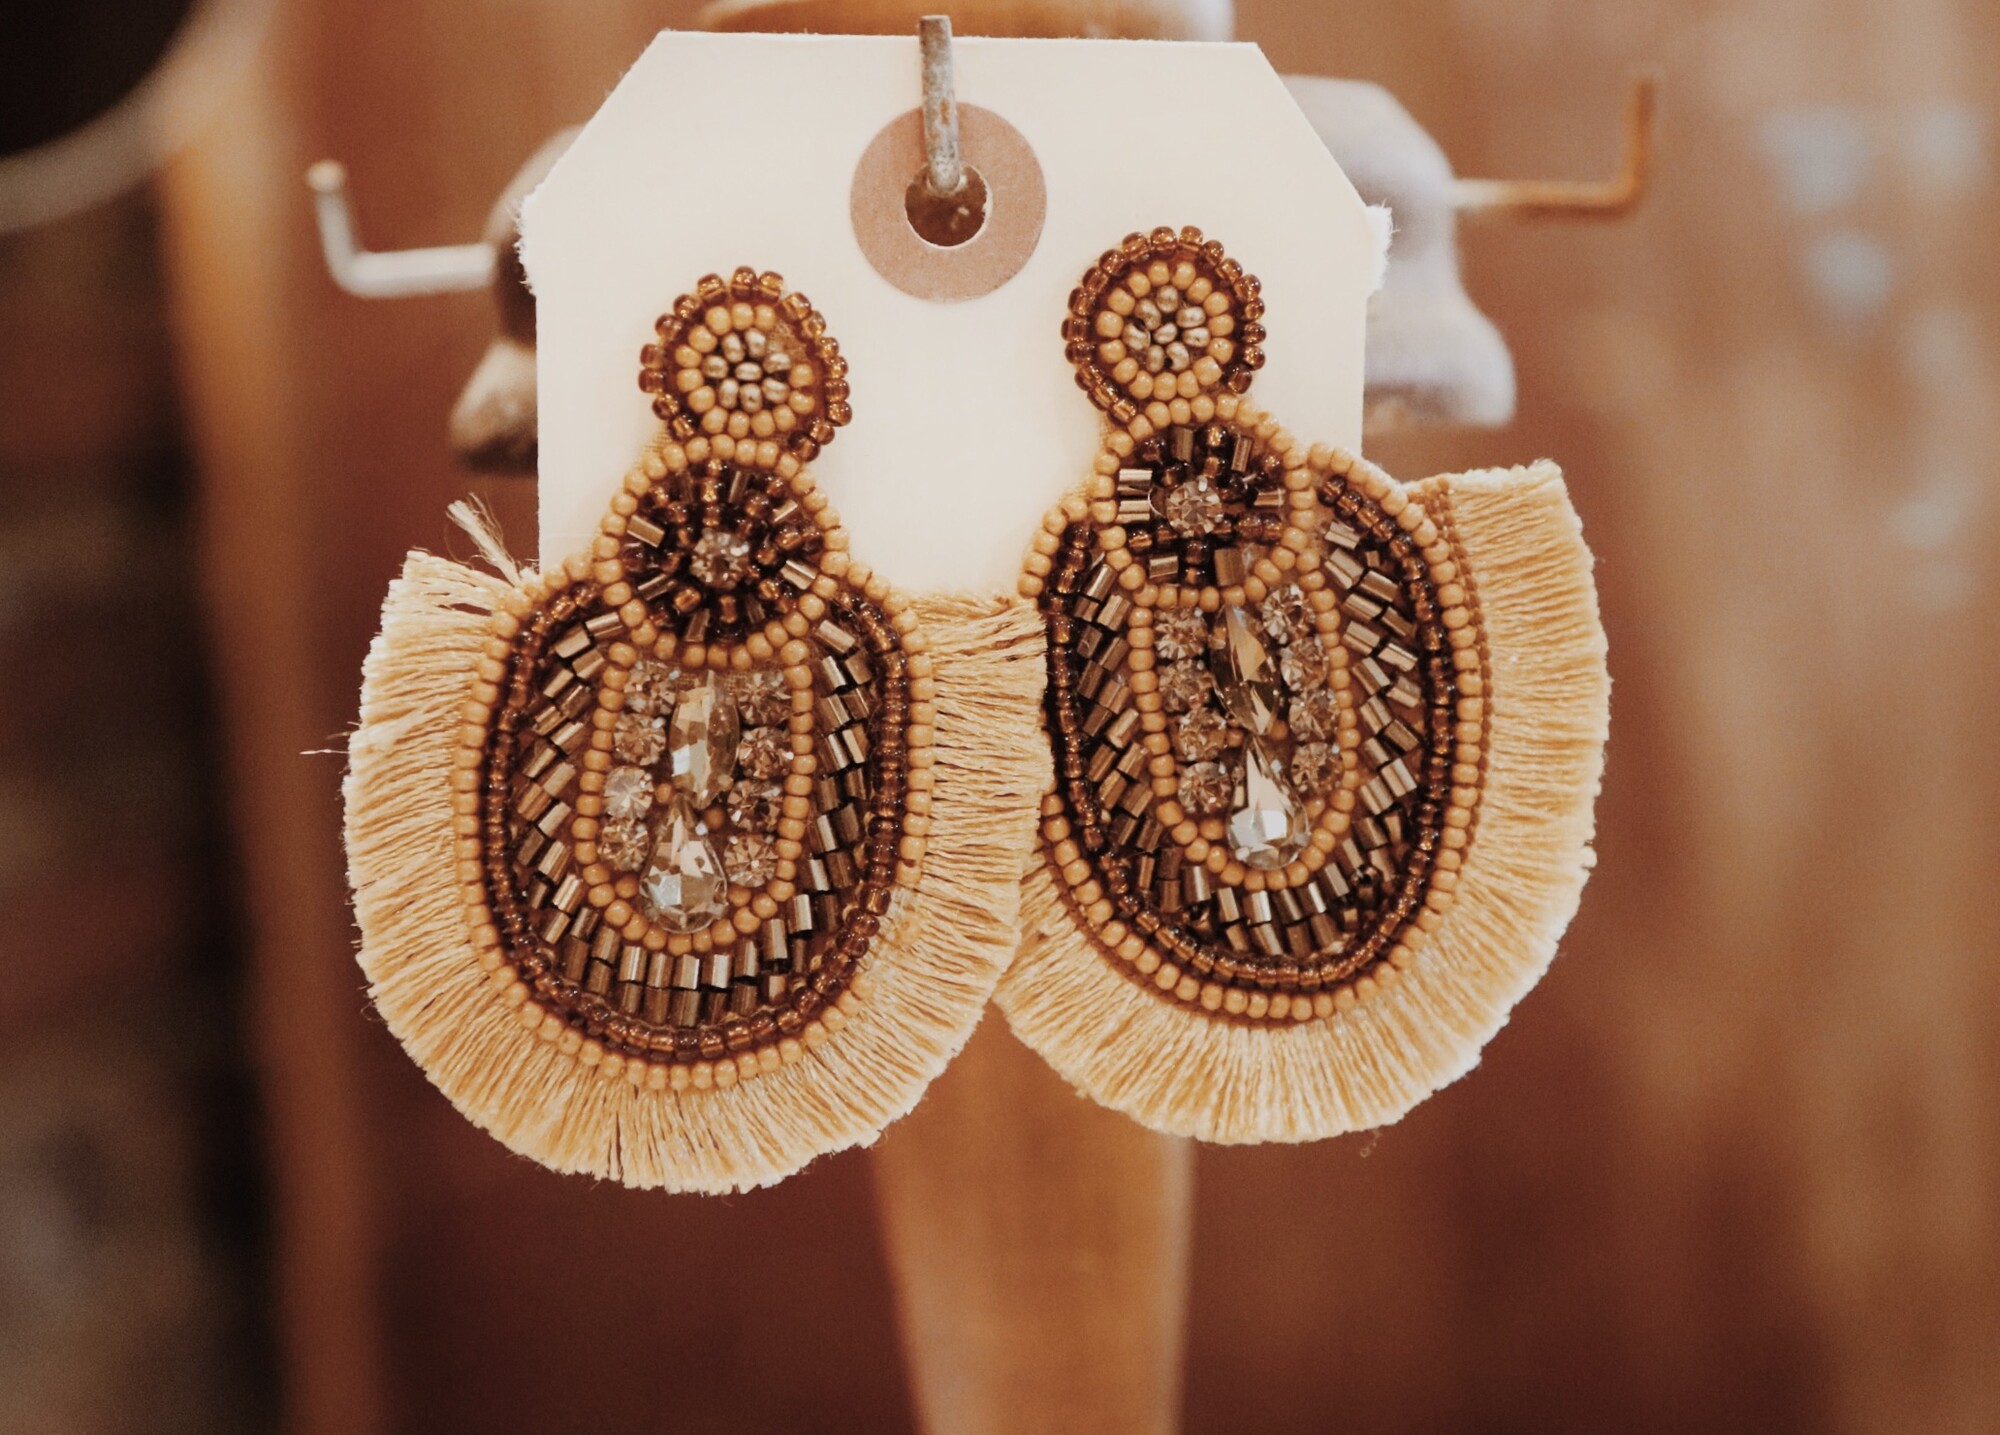 These beautiful earrings measure 2.5 inches long!